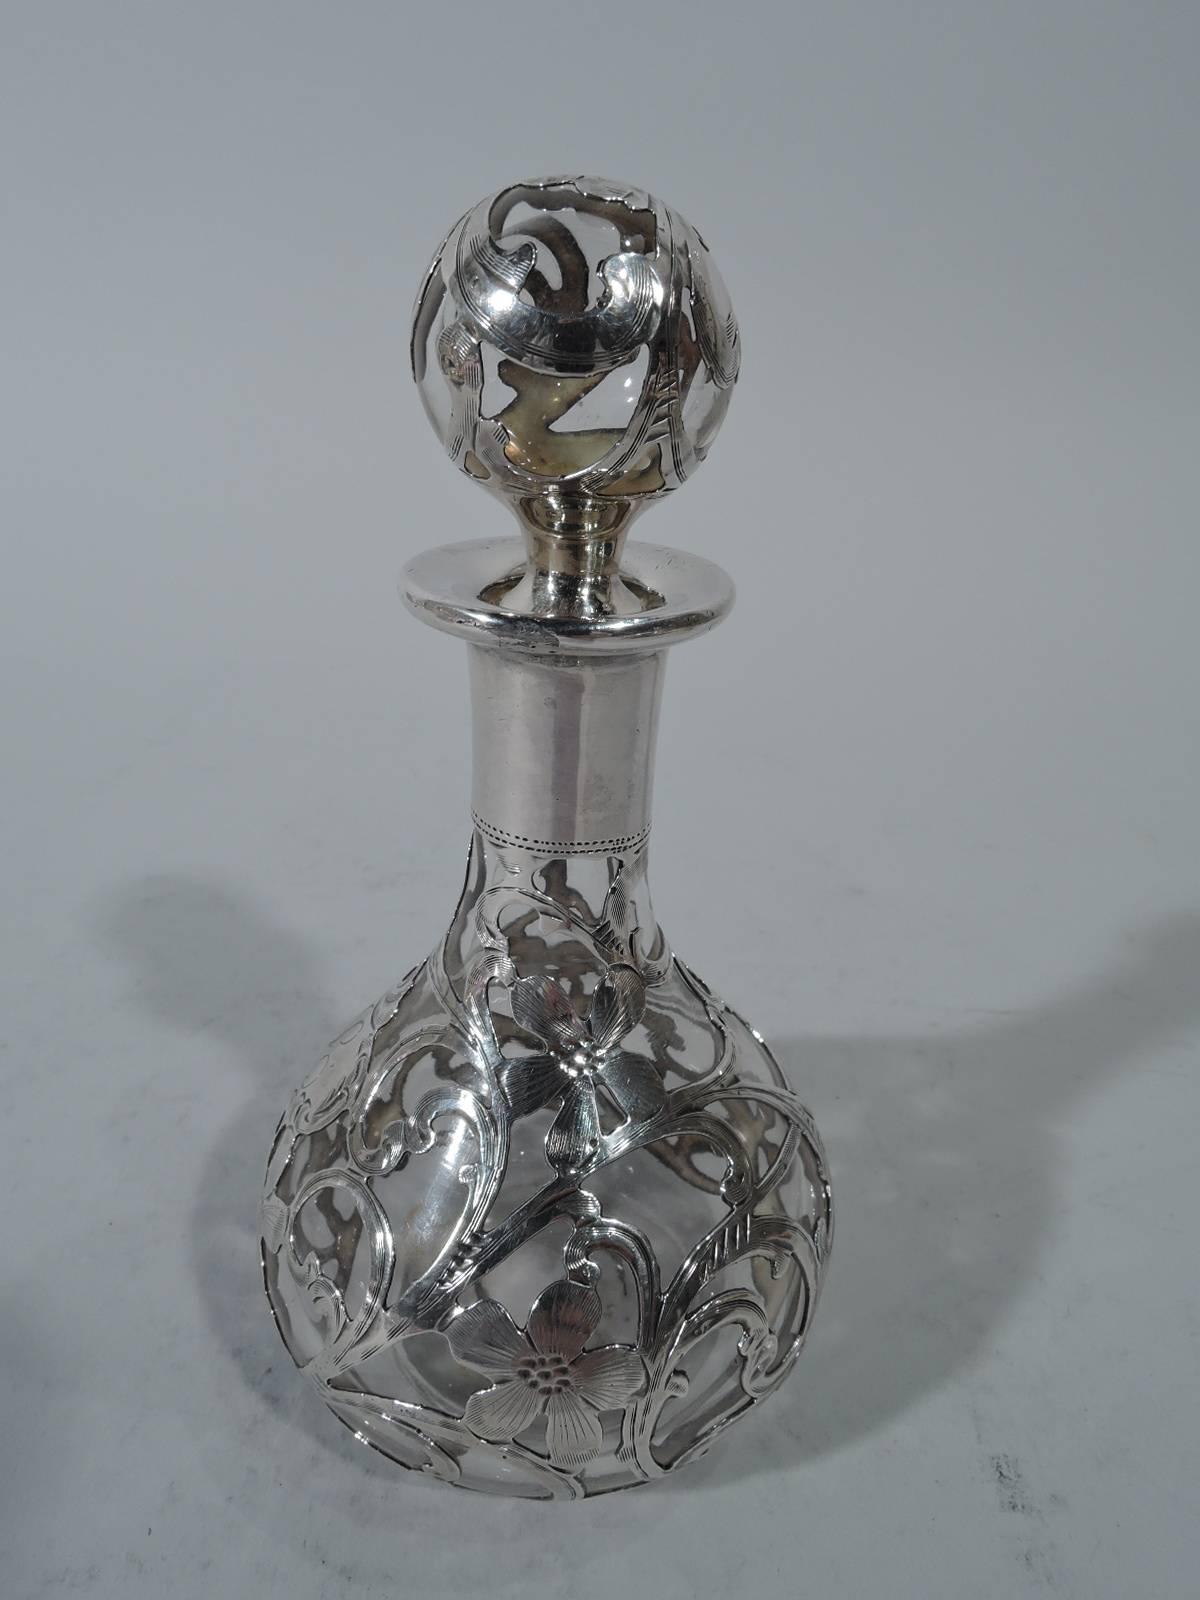 Art Nouveau silver overlaid glass perfume bottle and stopper. Made by Alvin in Providence. Bottle globular with cylindrical neck. Ball stopper with short and tapering plug. Silver overlay heightened with engraving: Fluid foliate scrollwork and